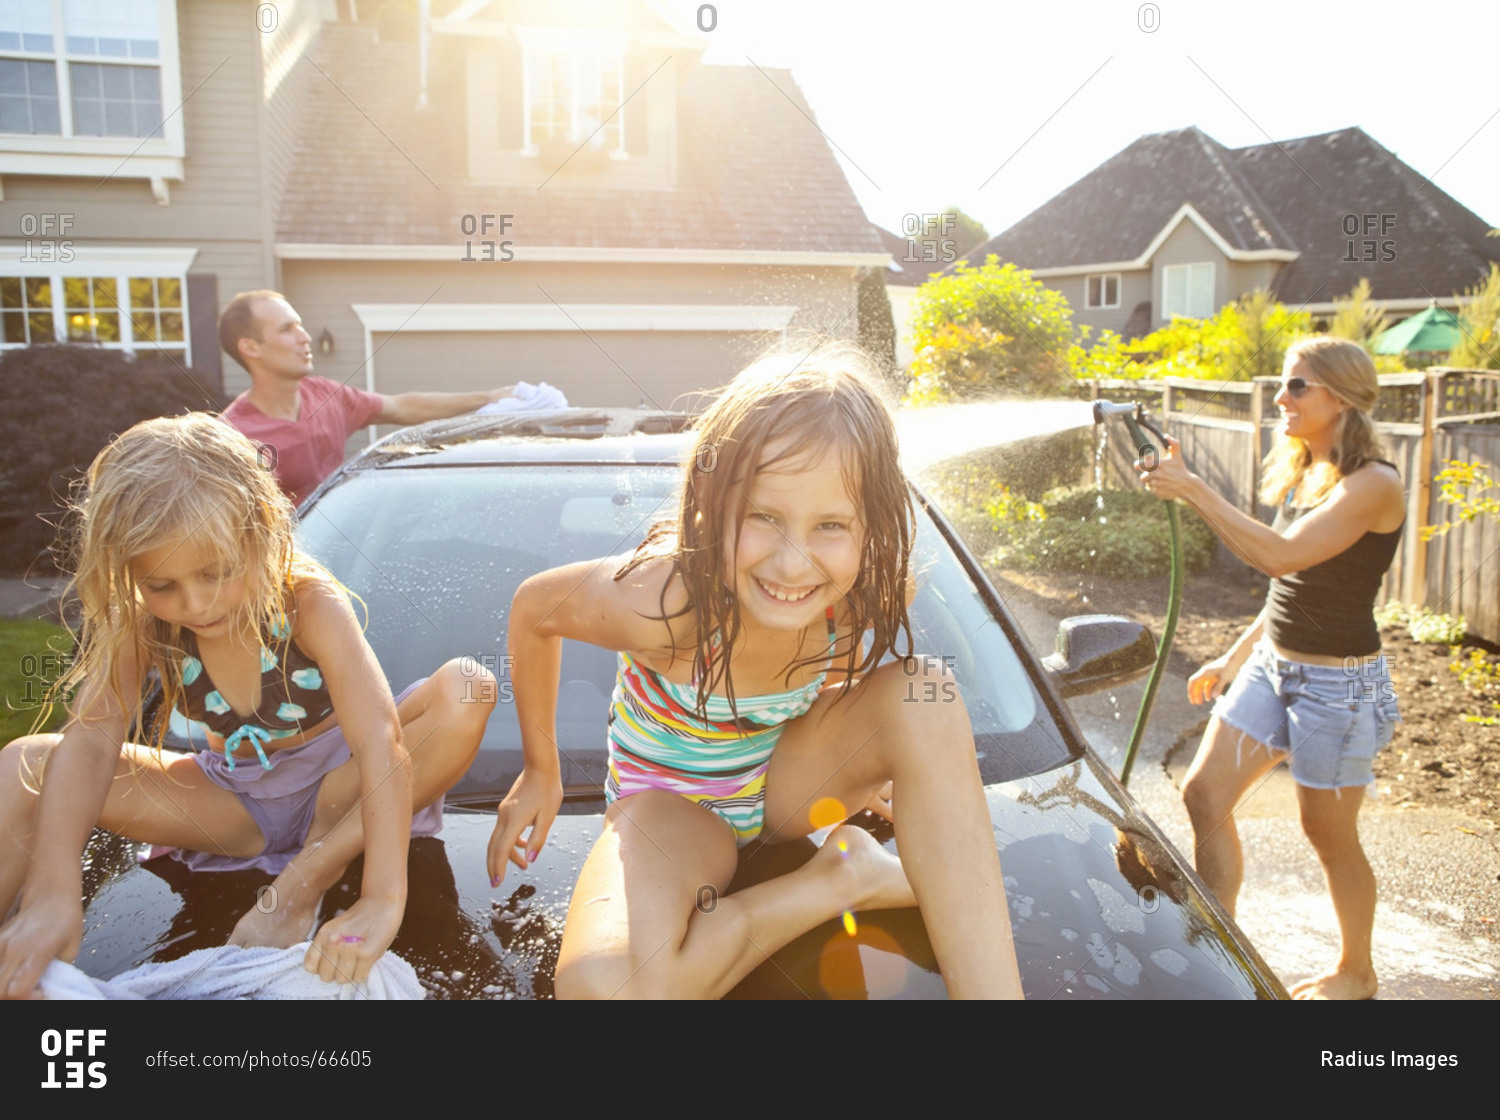 A family washes their car in the driveway of their home on a sunny summer afternoon in Portland, Oregon, USA